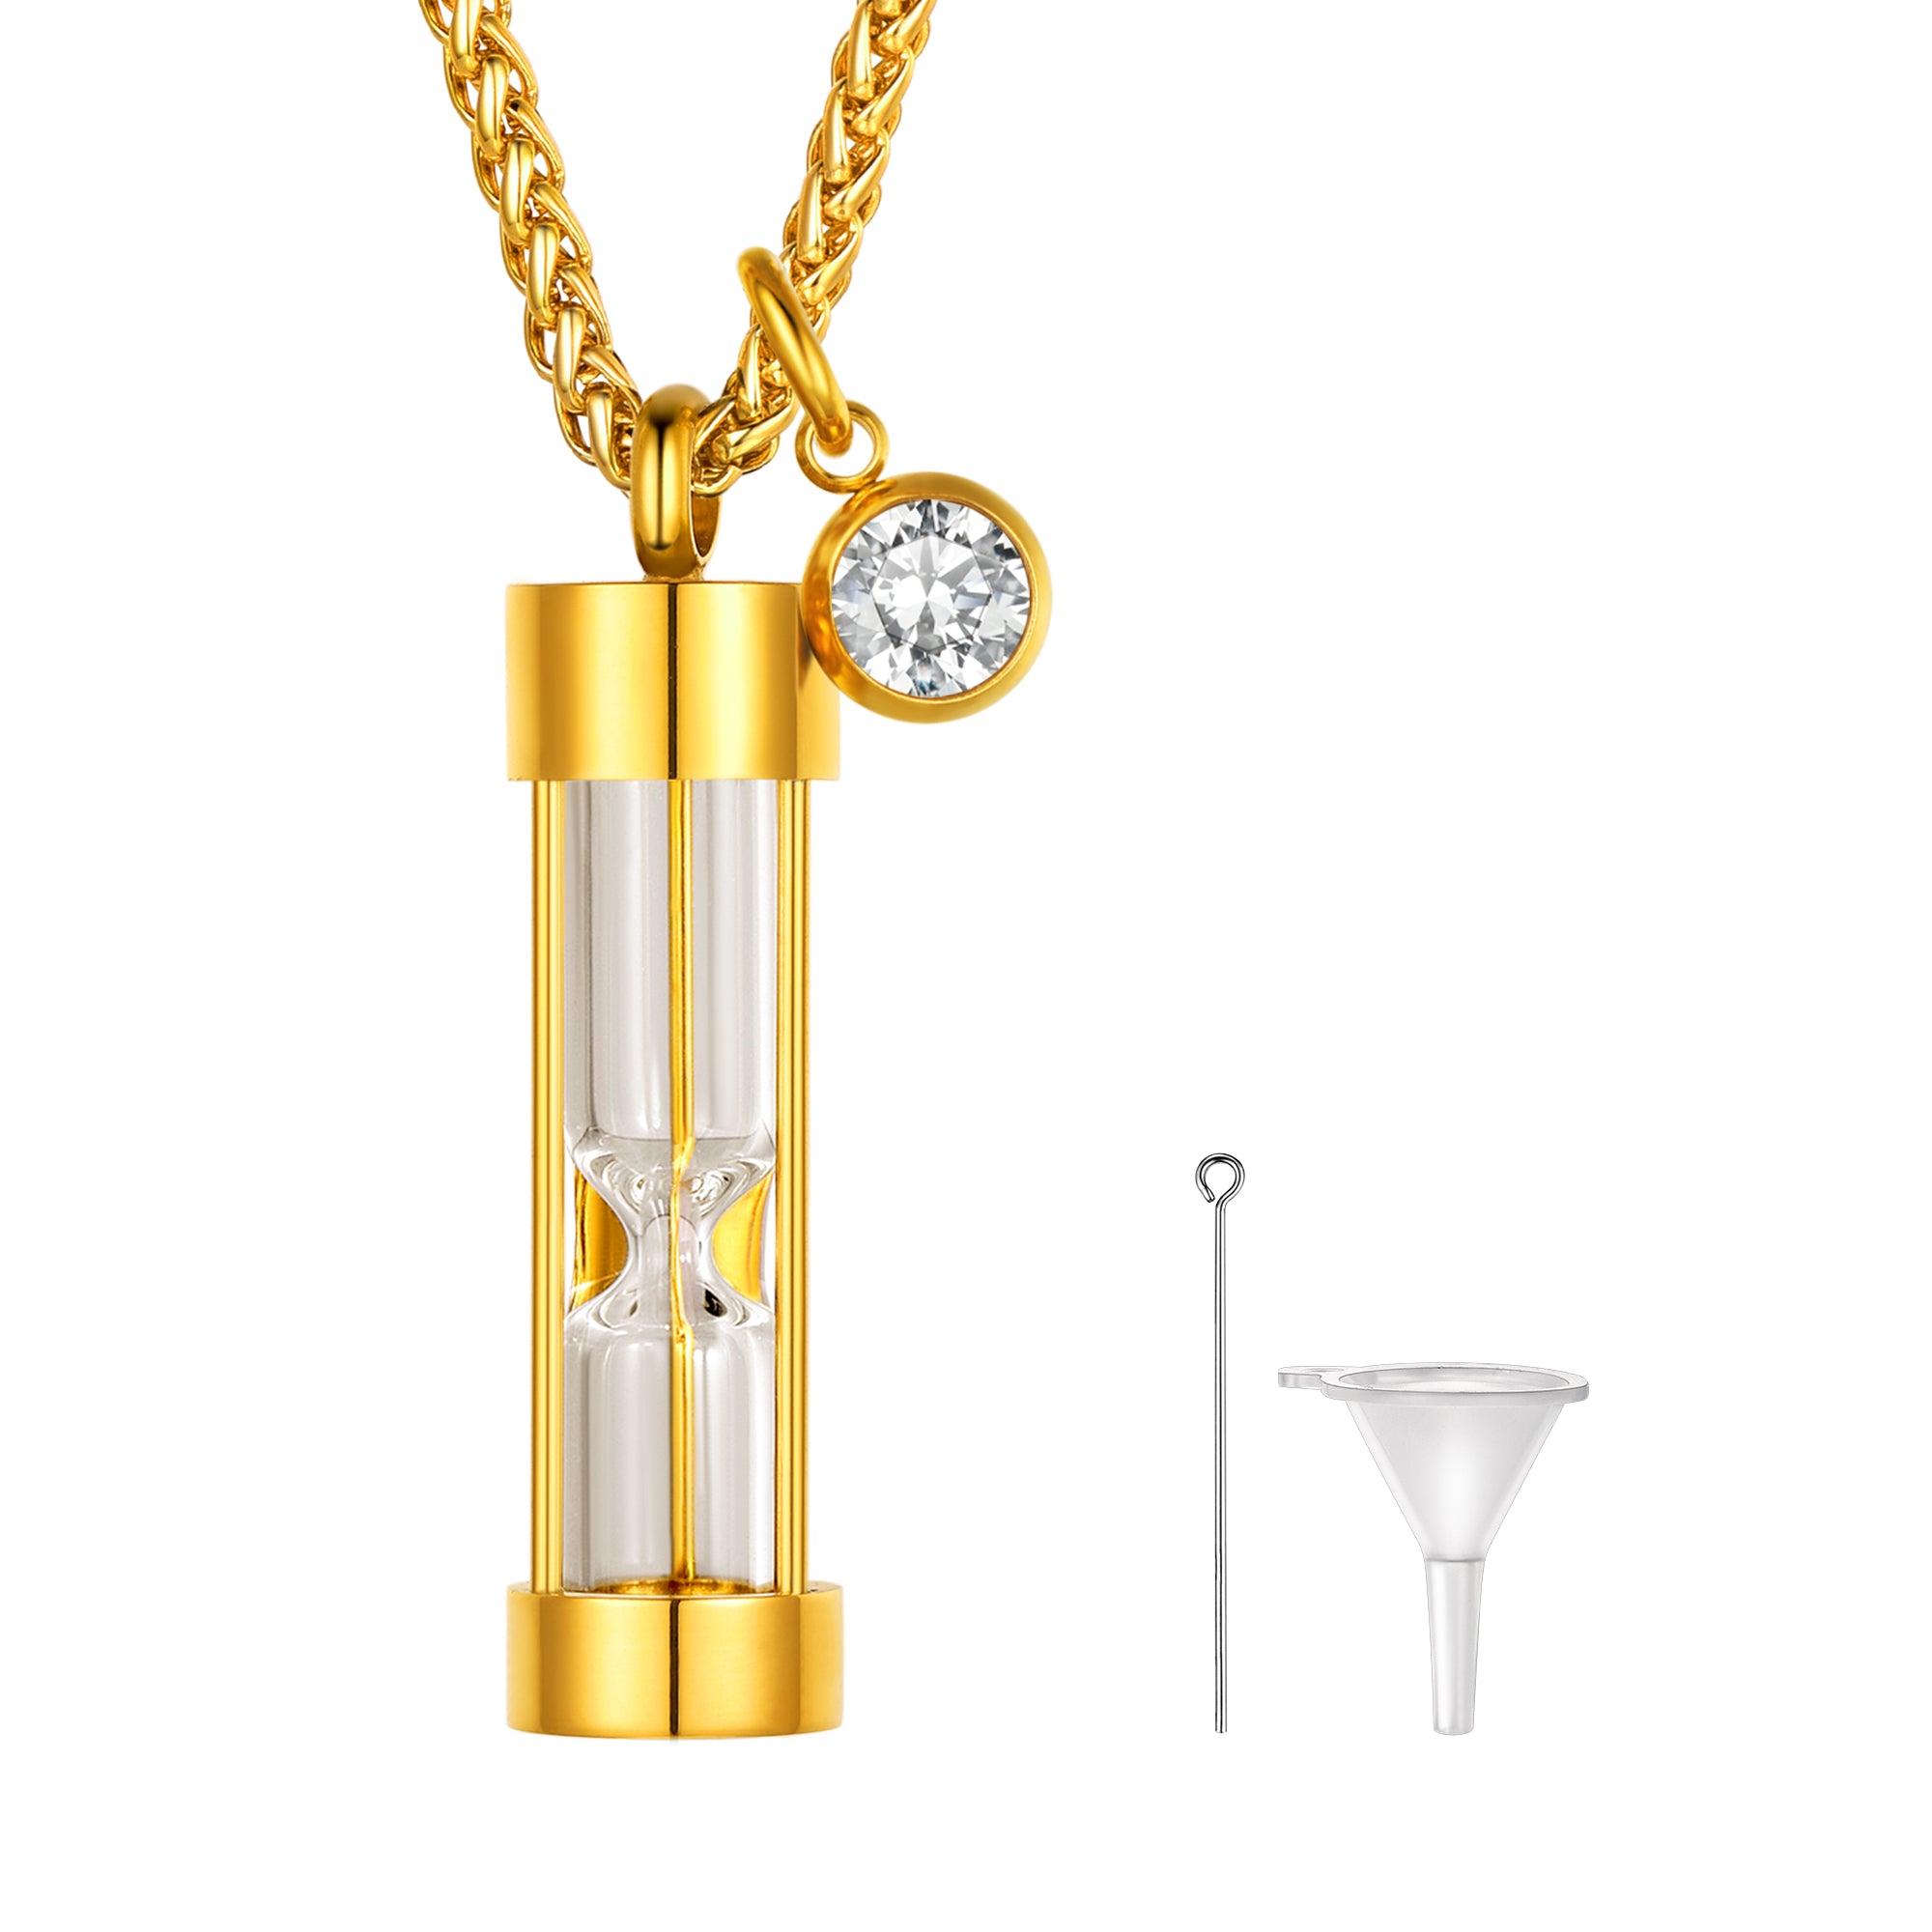 New Hourglass Cremation Cylinder Hour Glass Urn Keepsake Ashes Memorial  Necklace | eBay